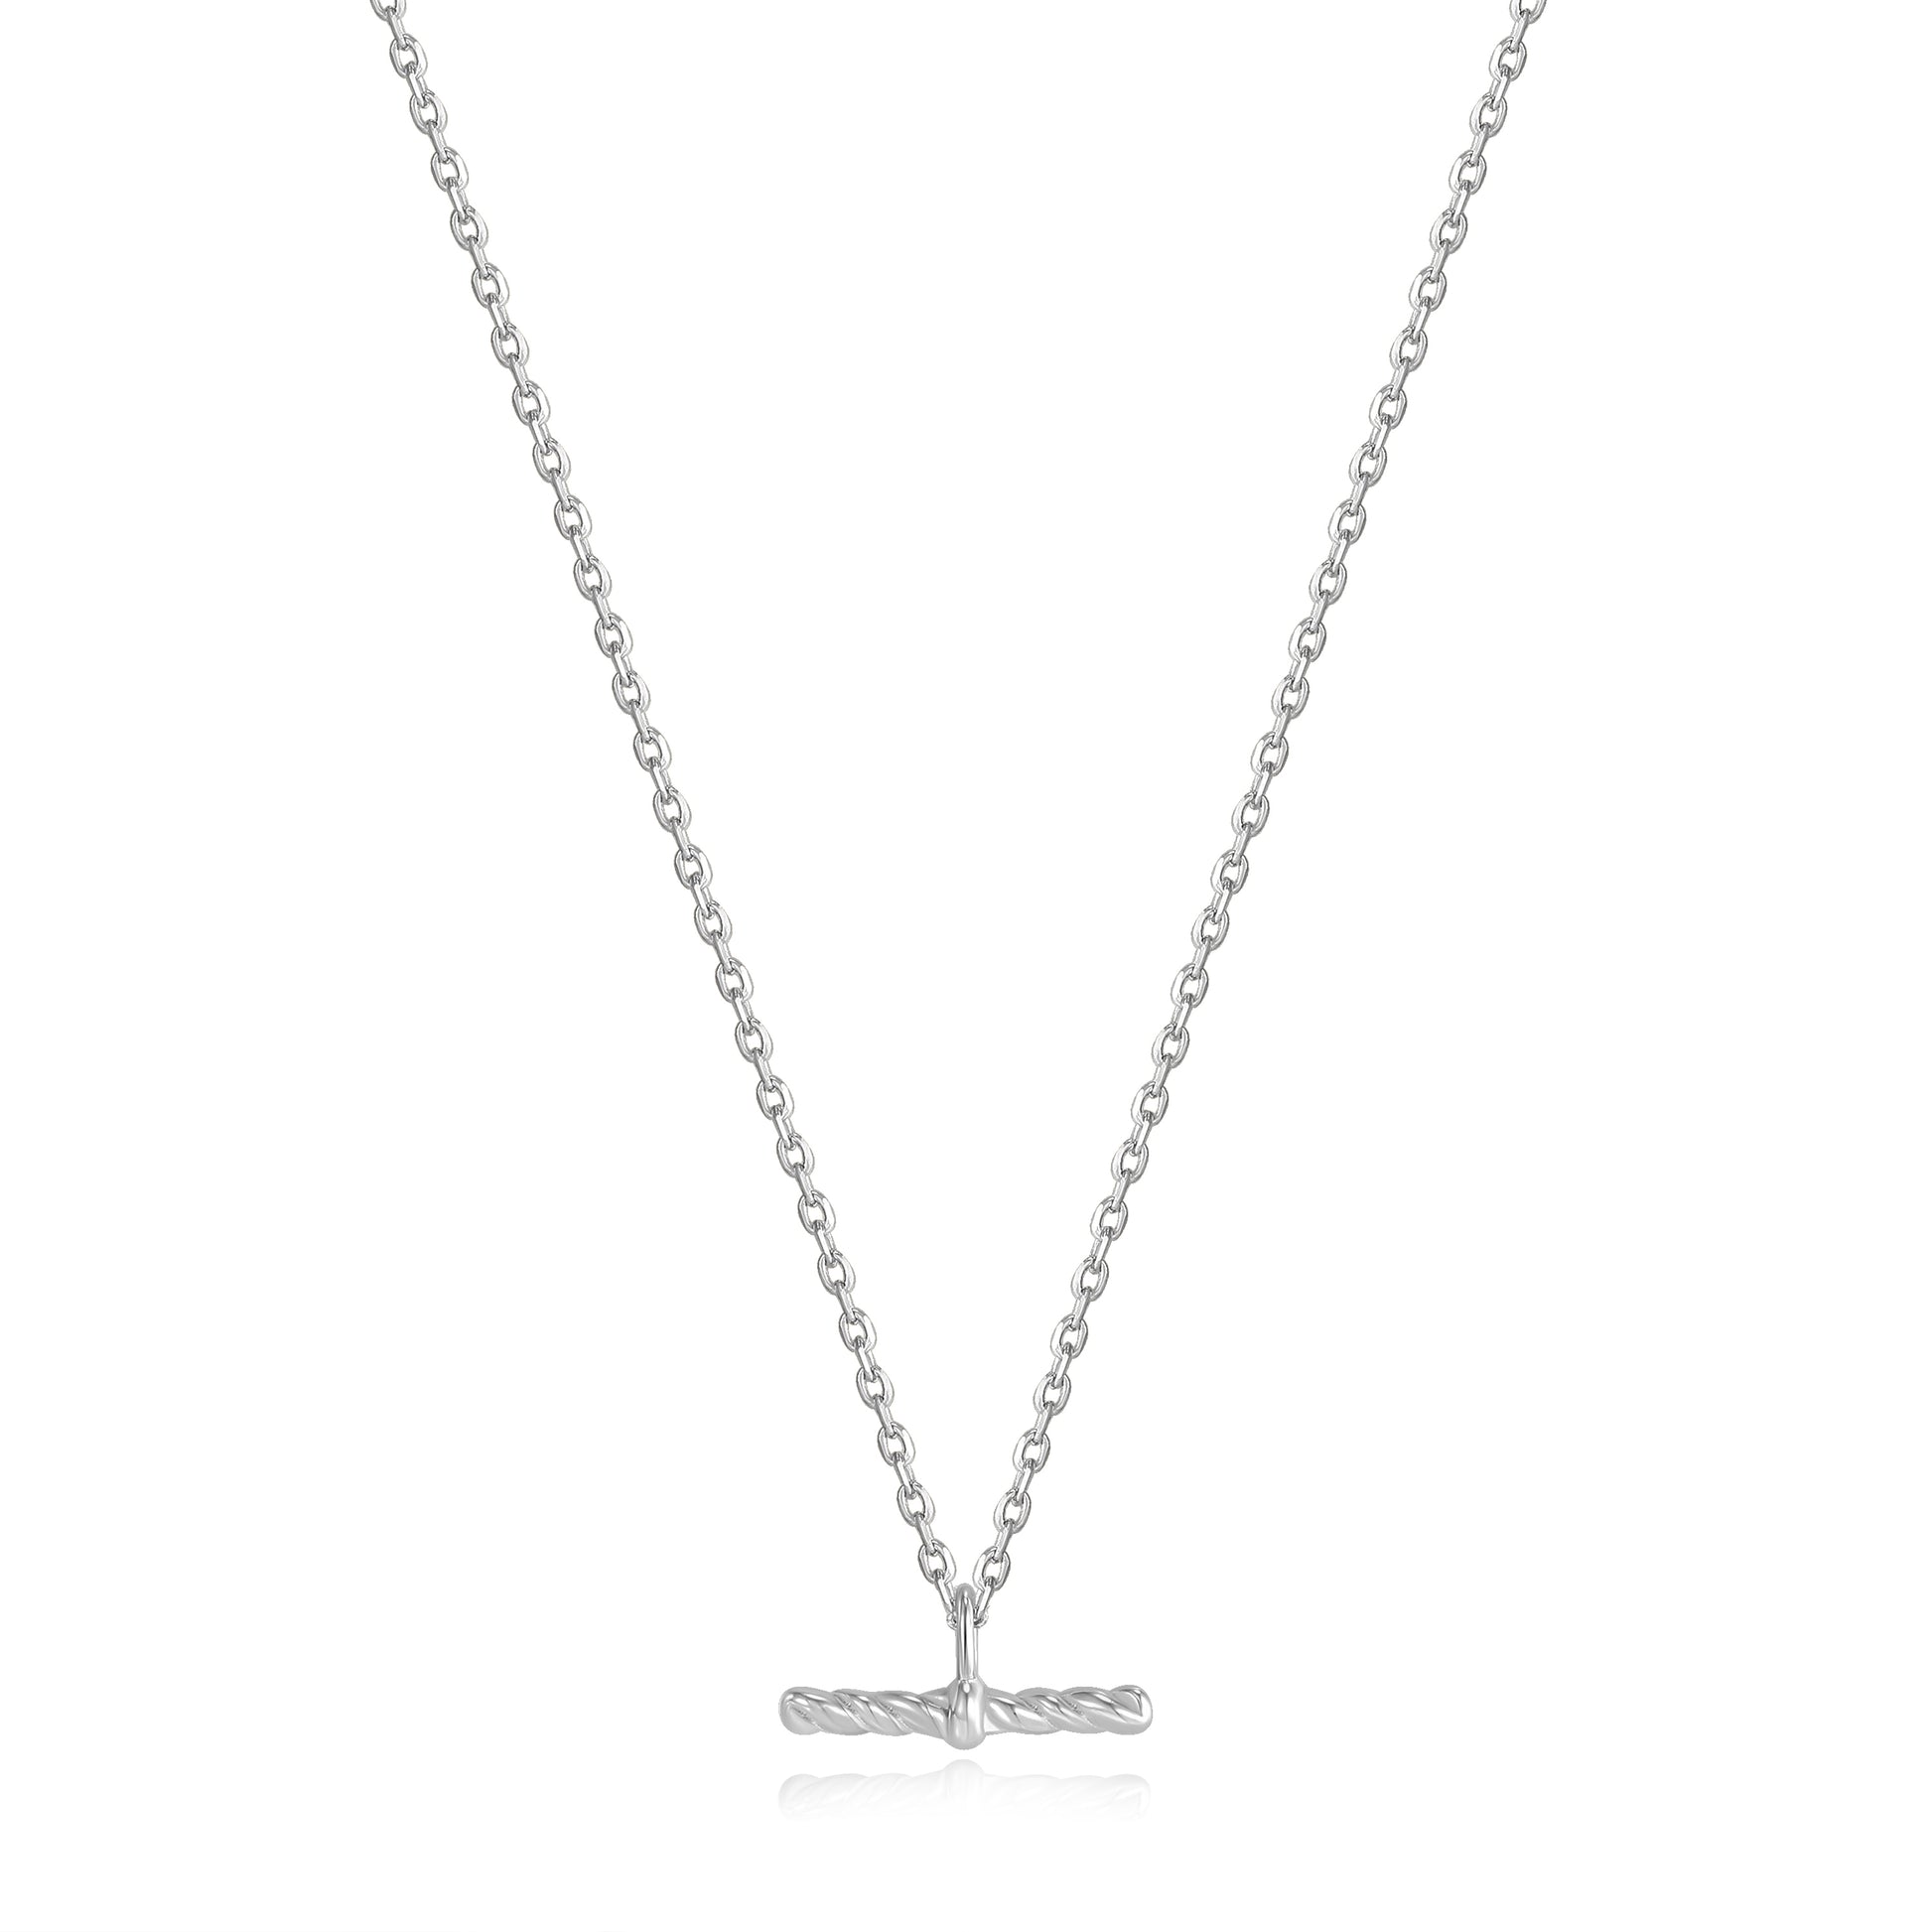 Ania Haie Rope T-Bar Necklace - Silver Necklace